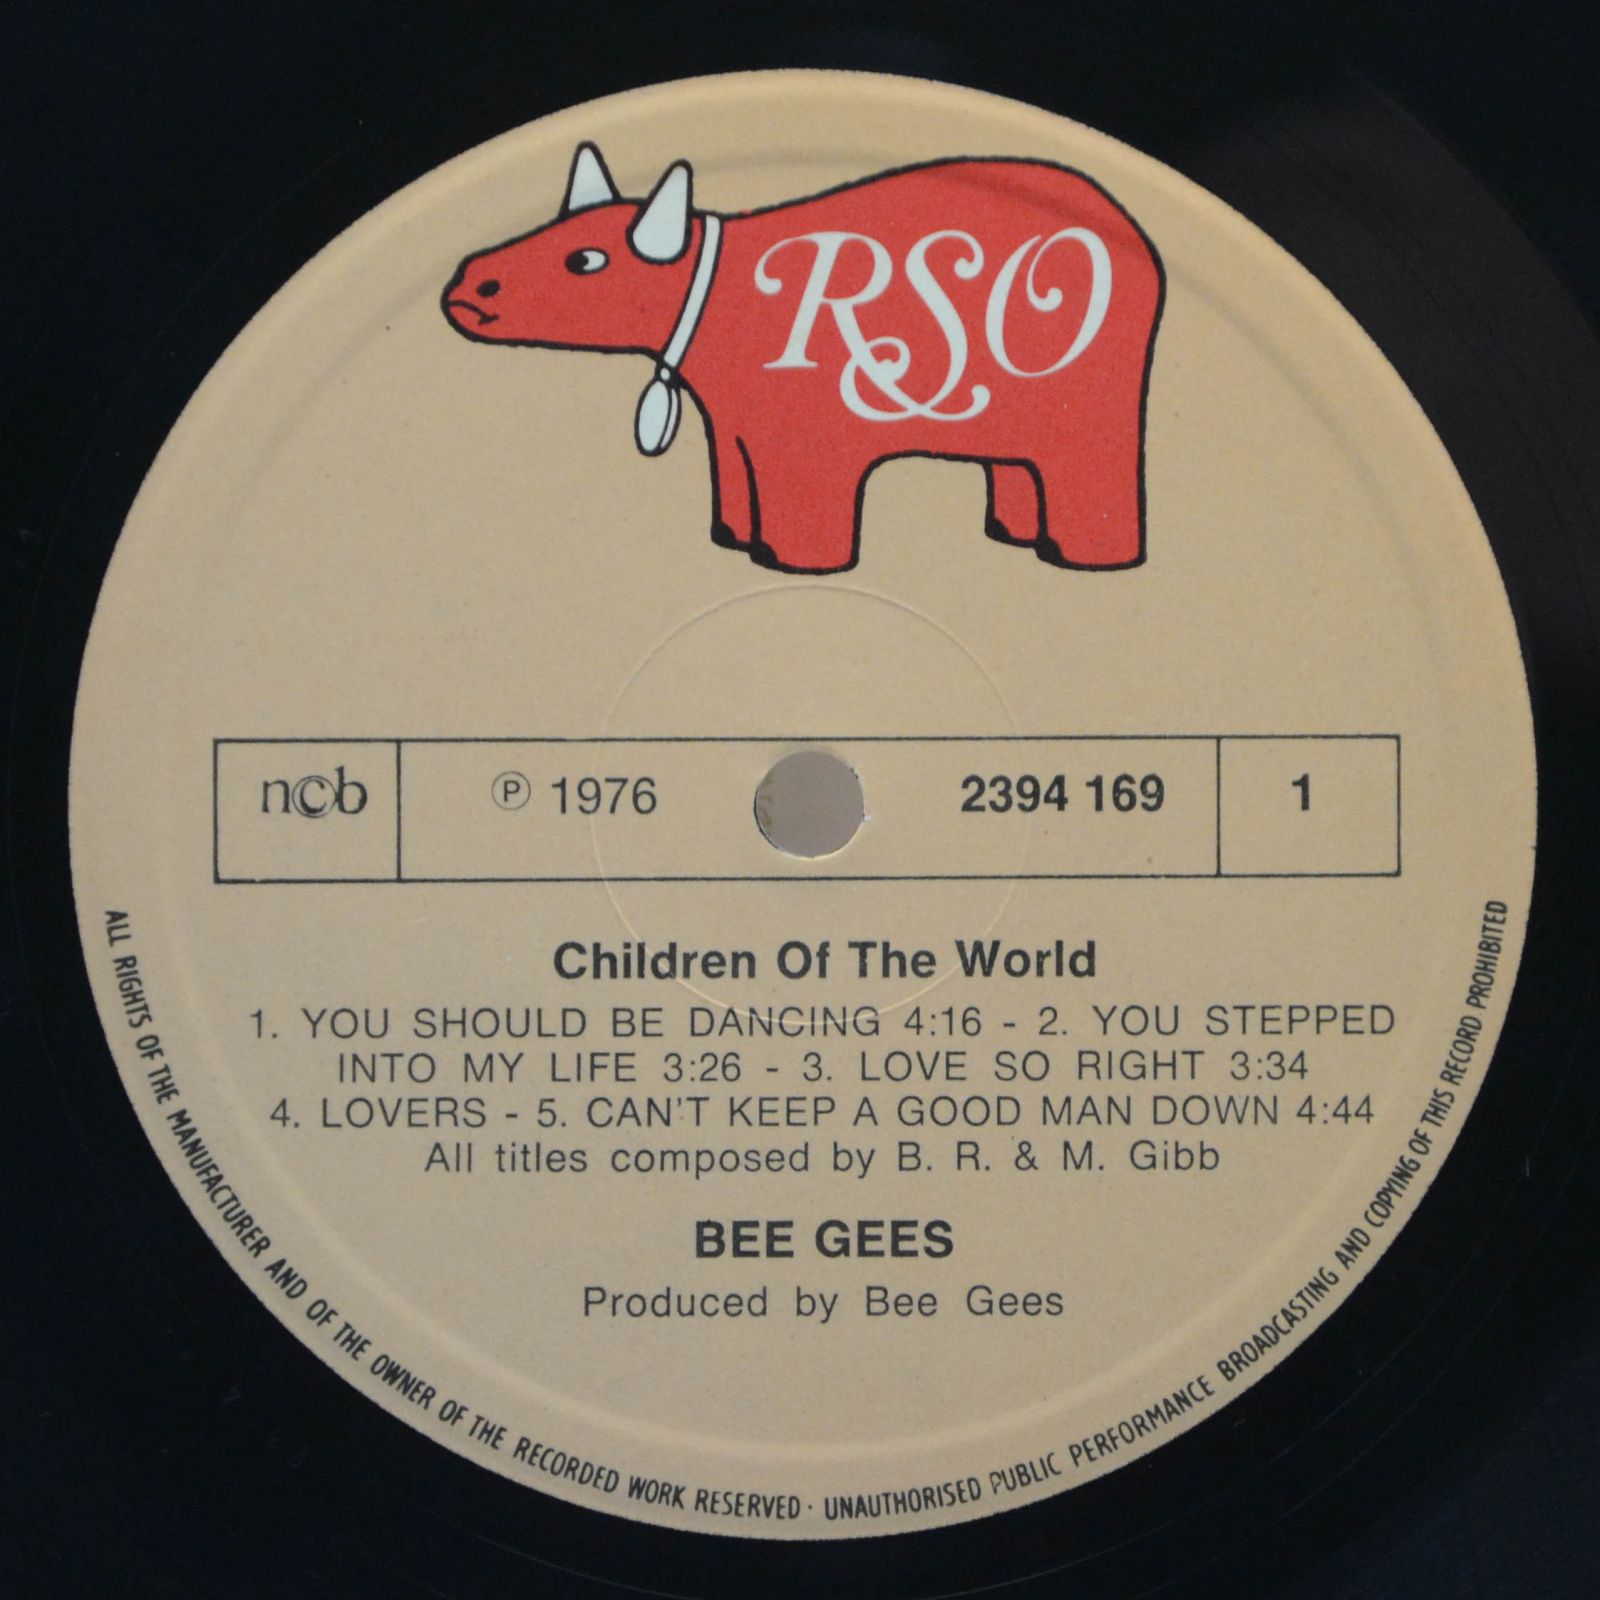 Bee Gees — Children Of The World, 1976